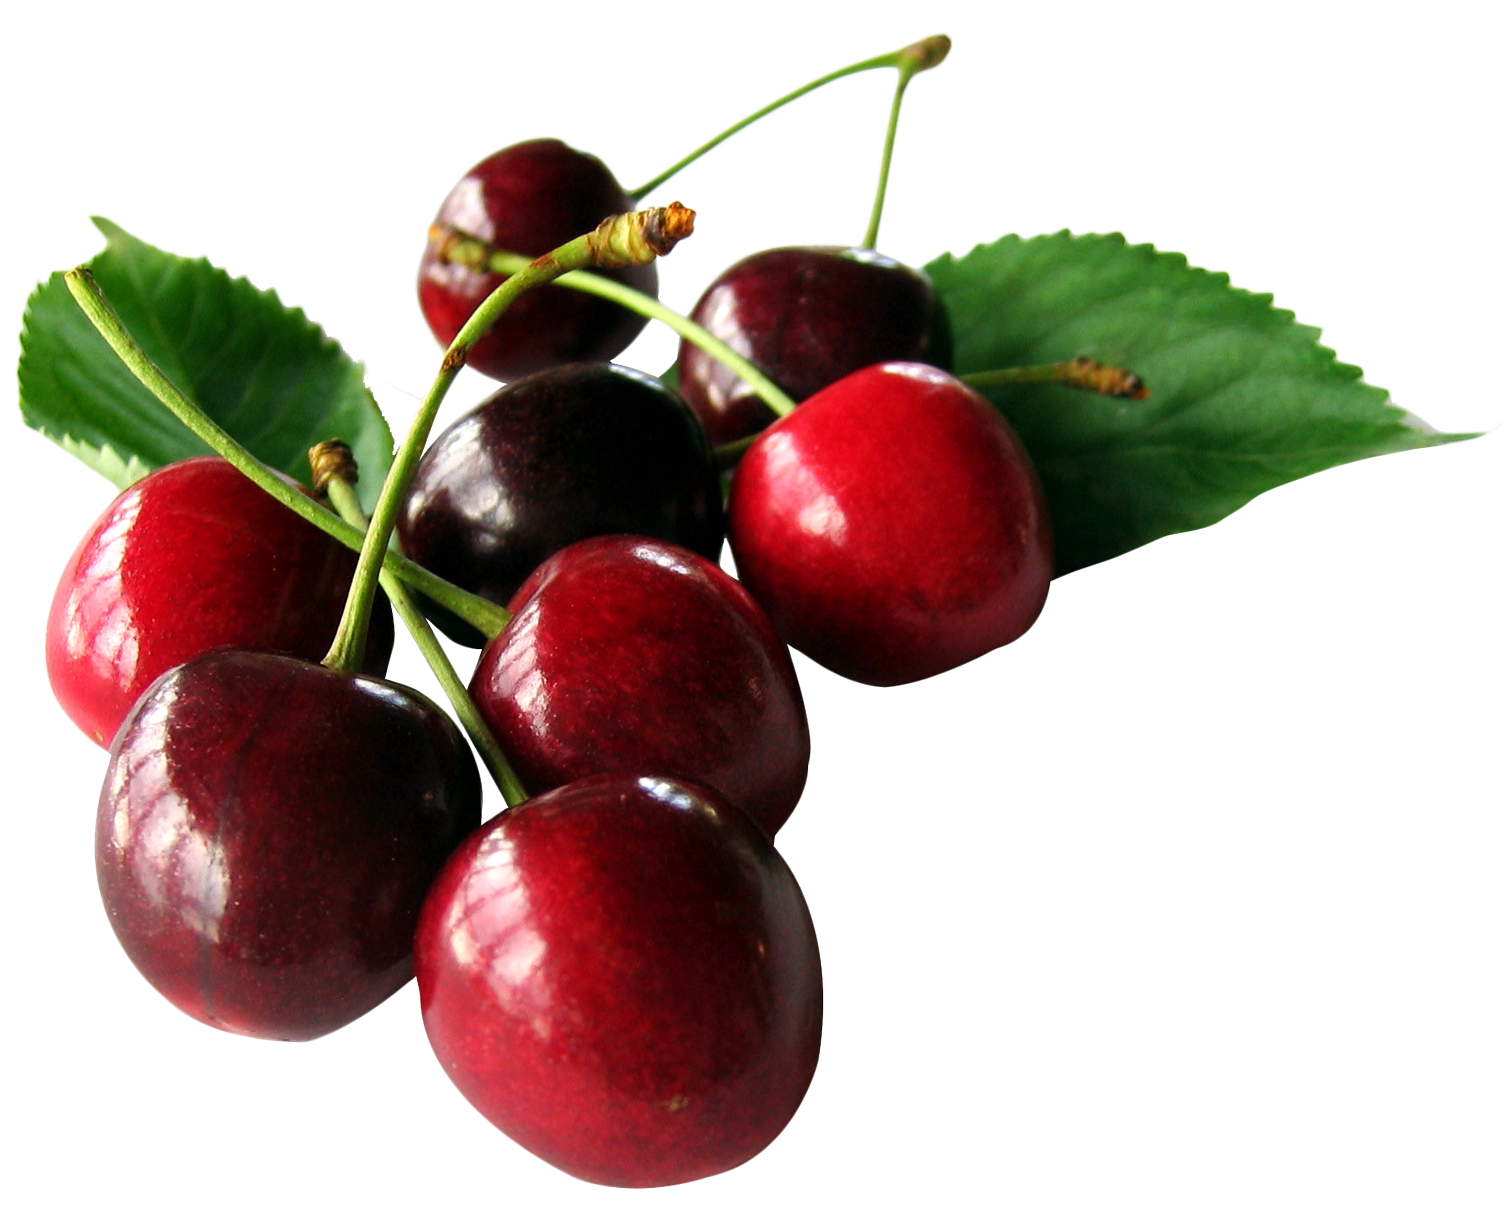 Cherries with leaf